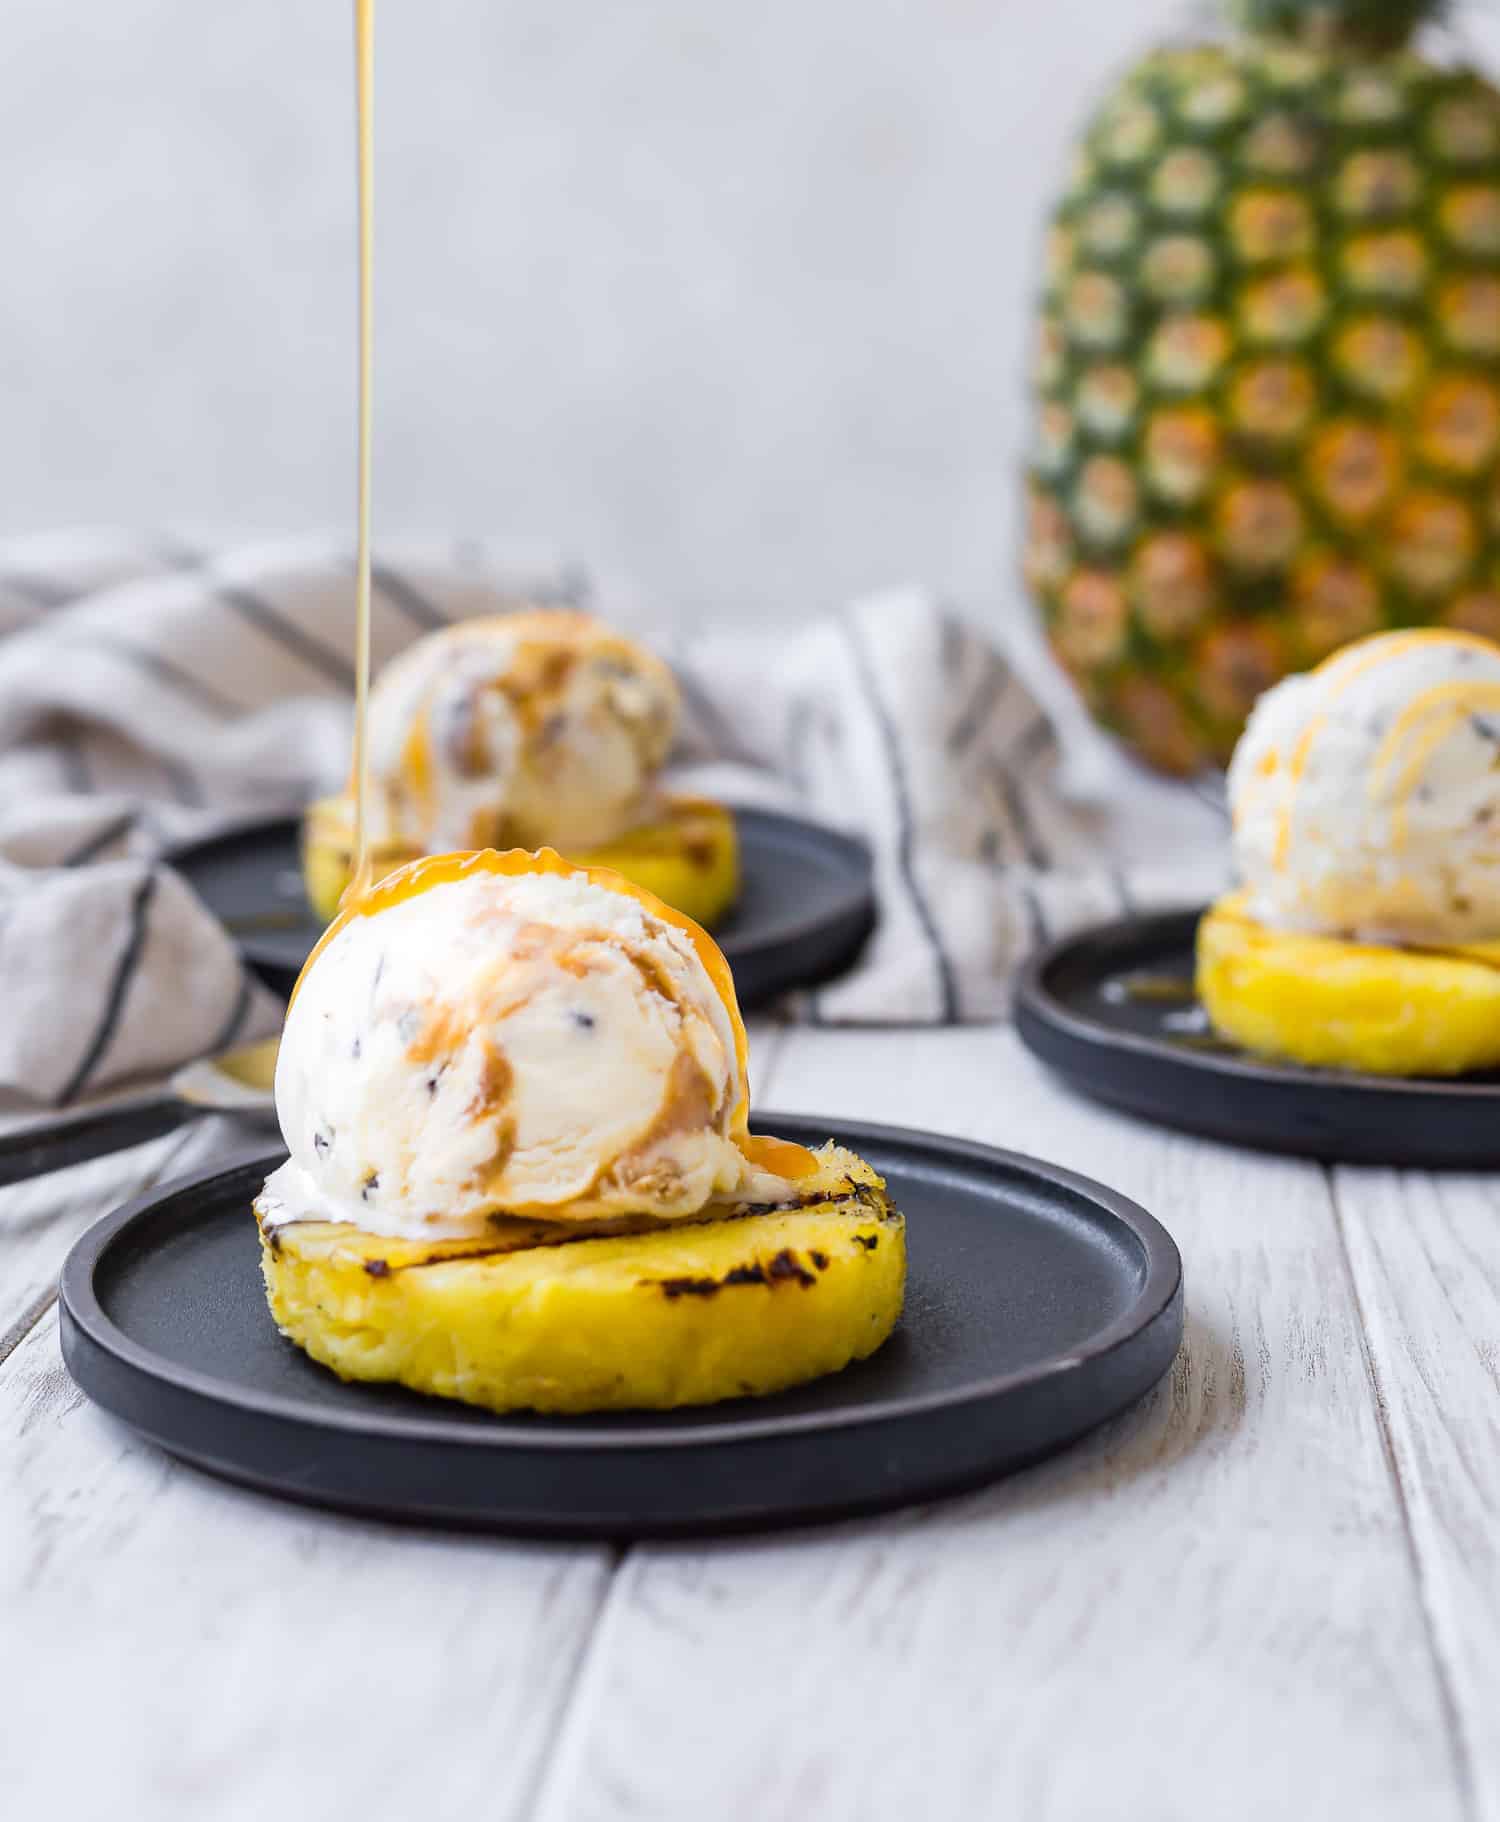 Caramel being drizzled on top of ice cream topped pineapple.